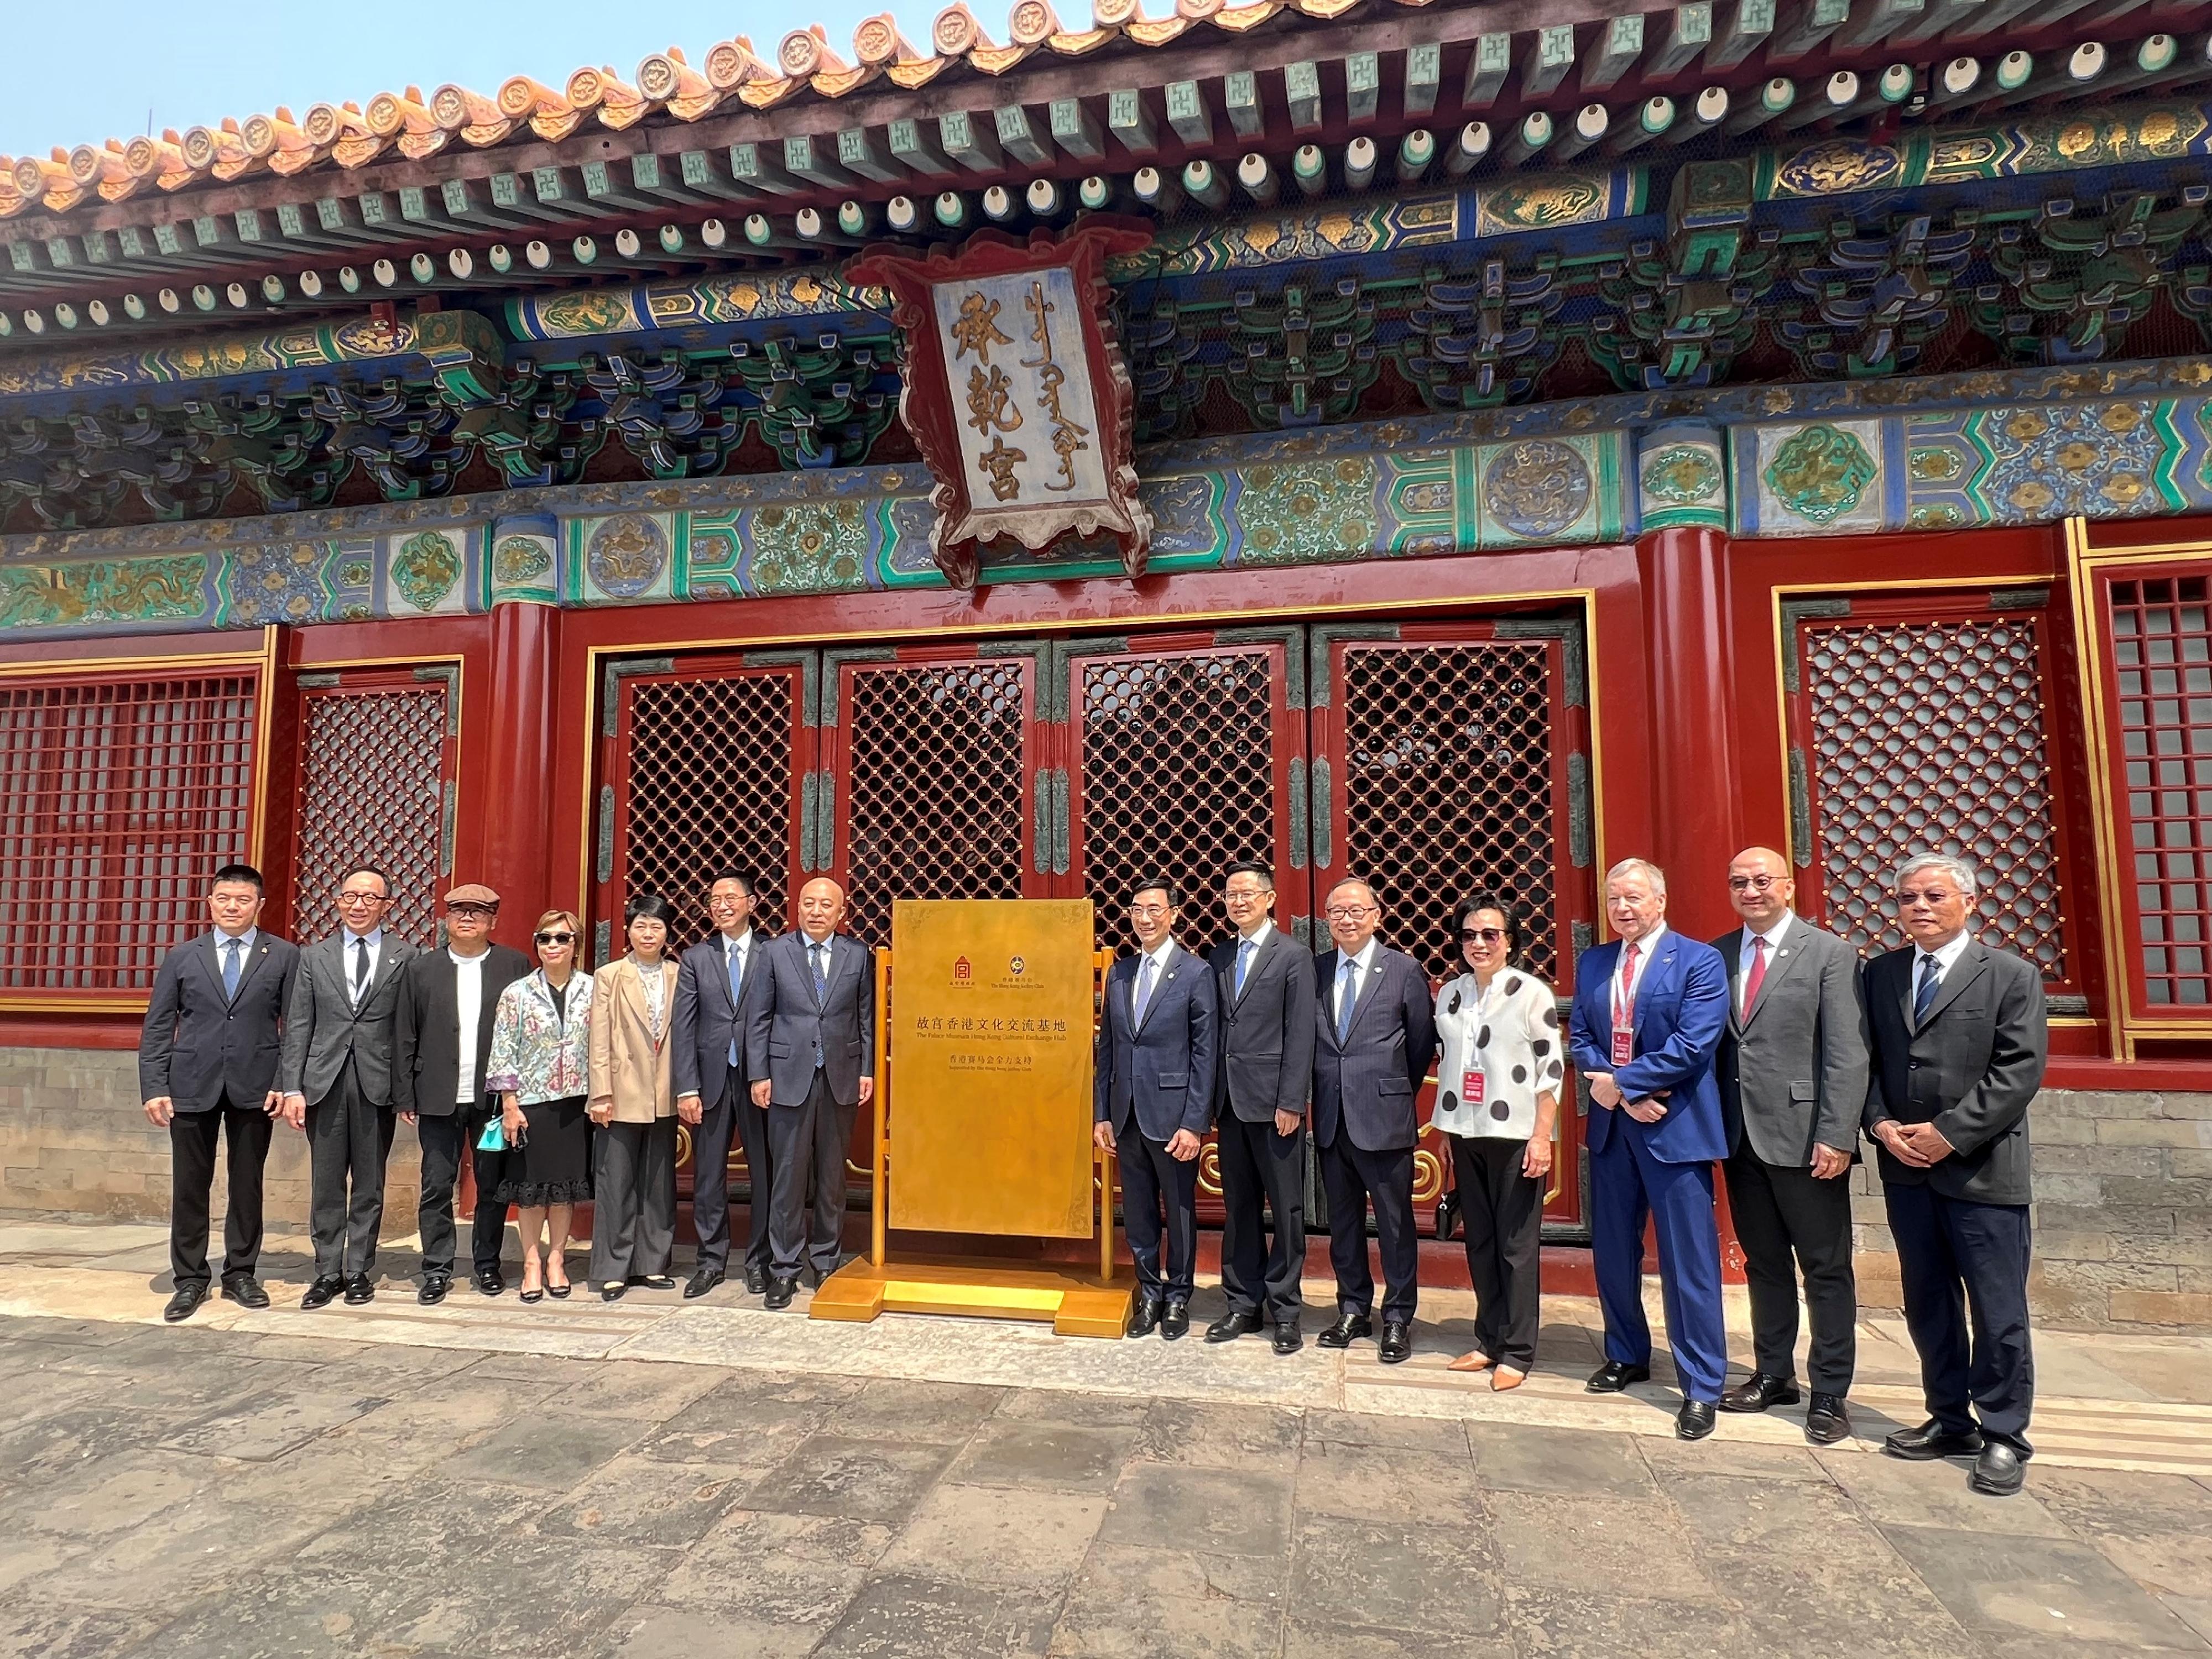 The Secretary for Culture, Sports and Tourism, Mr Kevin Yeung (sixth left), today (May 10) attended the Plaque Unveiling Ceremony for the Palace Museum Hong Kong Cultural Exchange Hub with the Director of the Palace Museum, Dr Wang Xudong (seventh left), and the Chairman of the Hong Kong Jockey Club, Mr Michael Lee (seventh right), at the Palace Museum in Beijing.